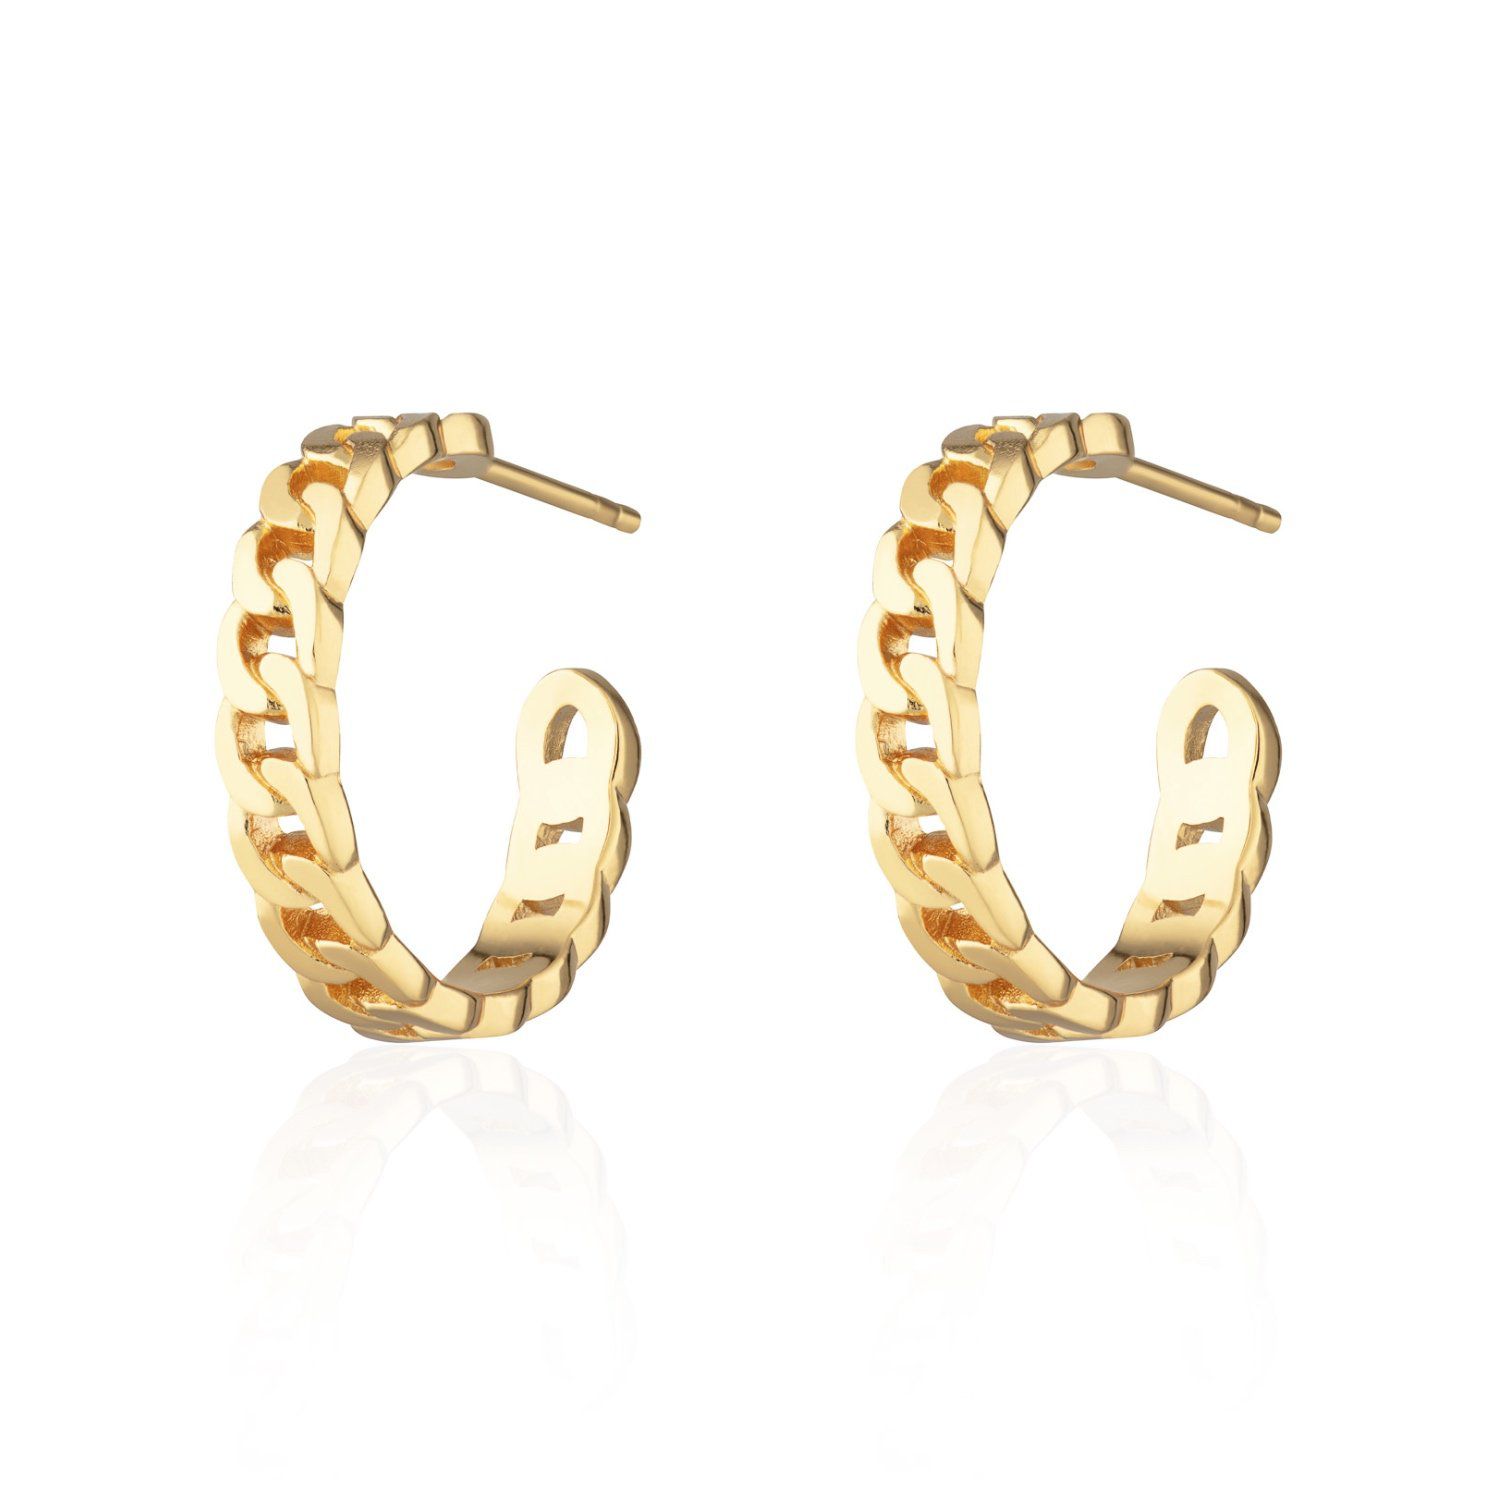 CHAIN REACTION HOOP STUD EARRINGS GOLD PLATED - Castle Collection